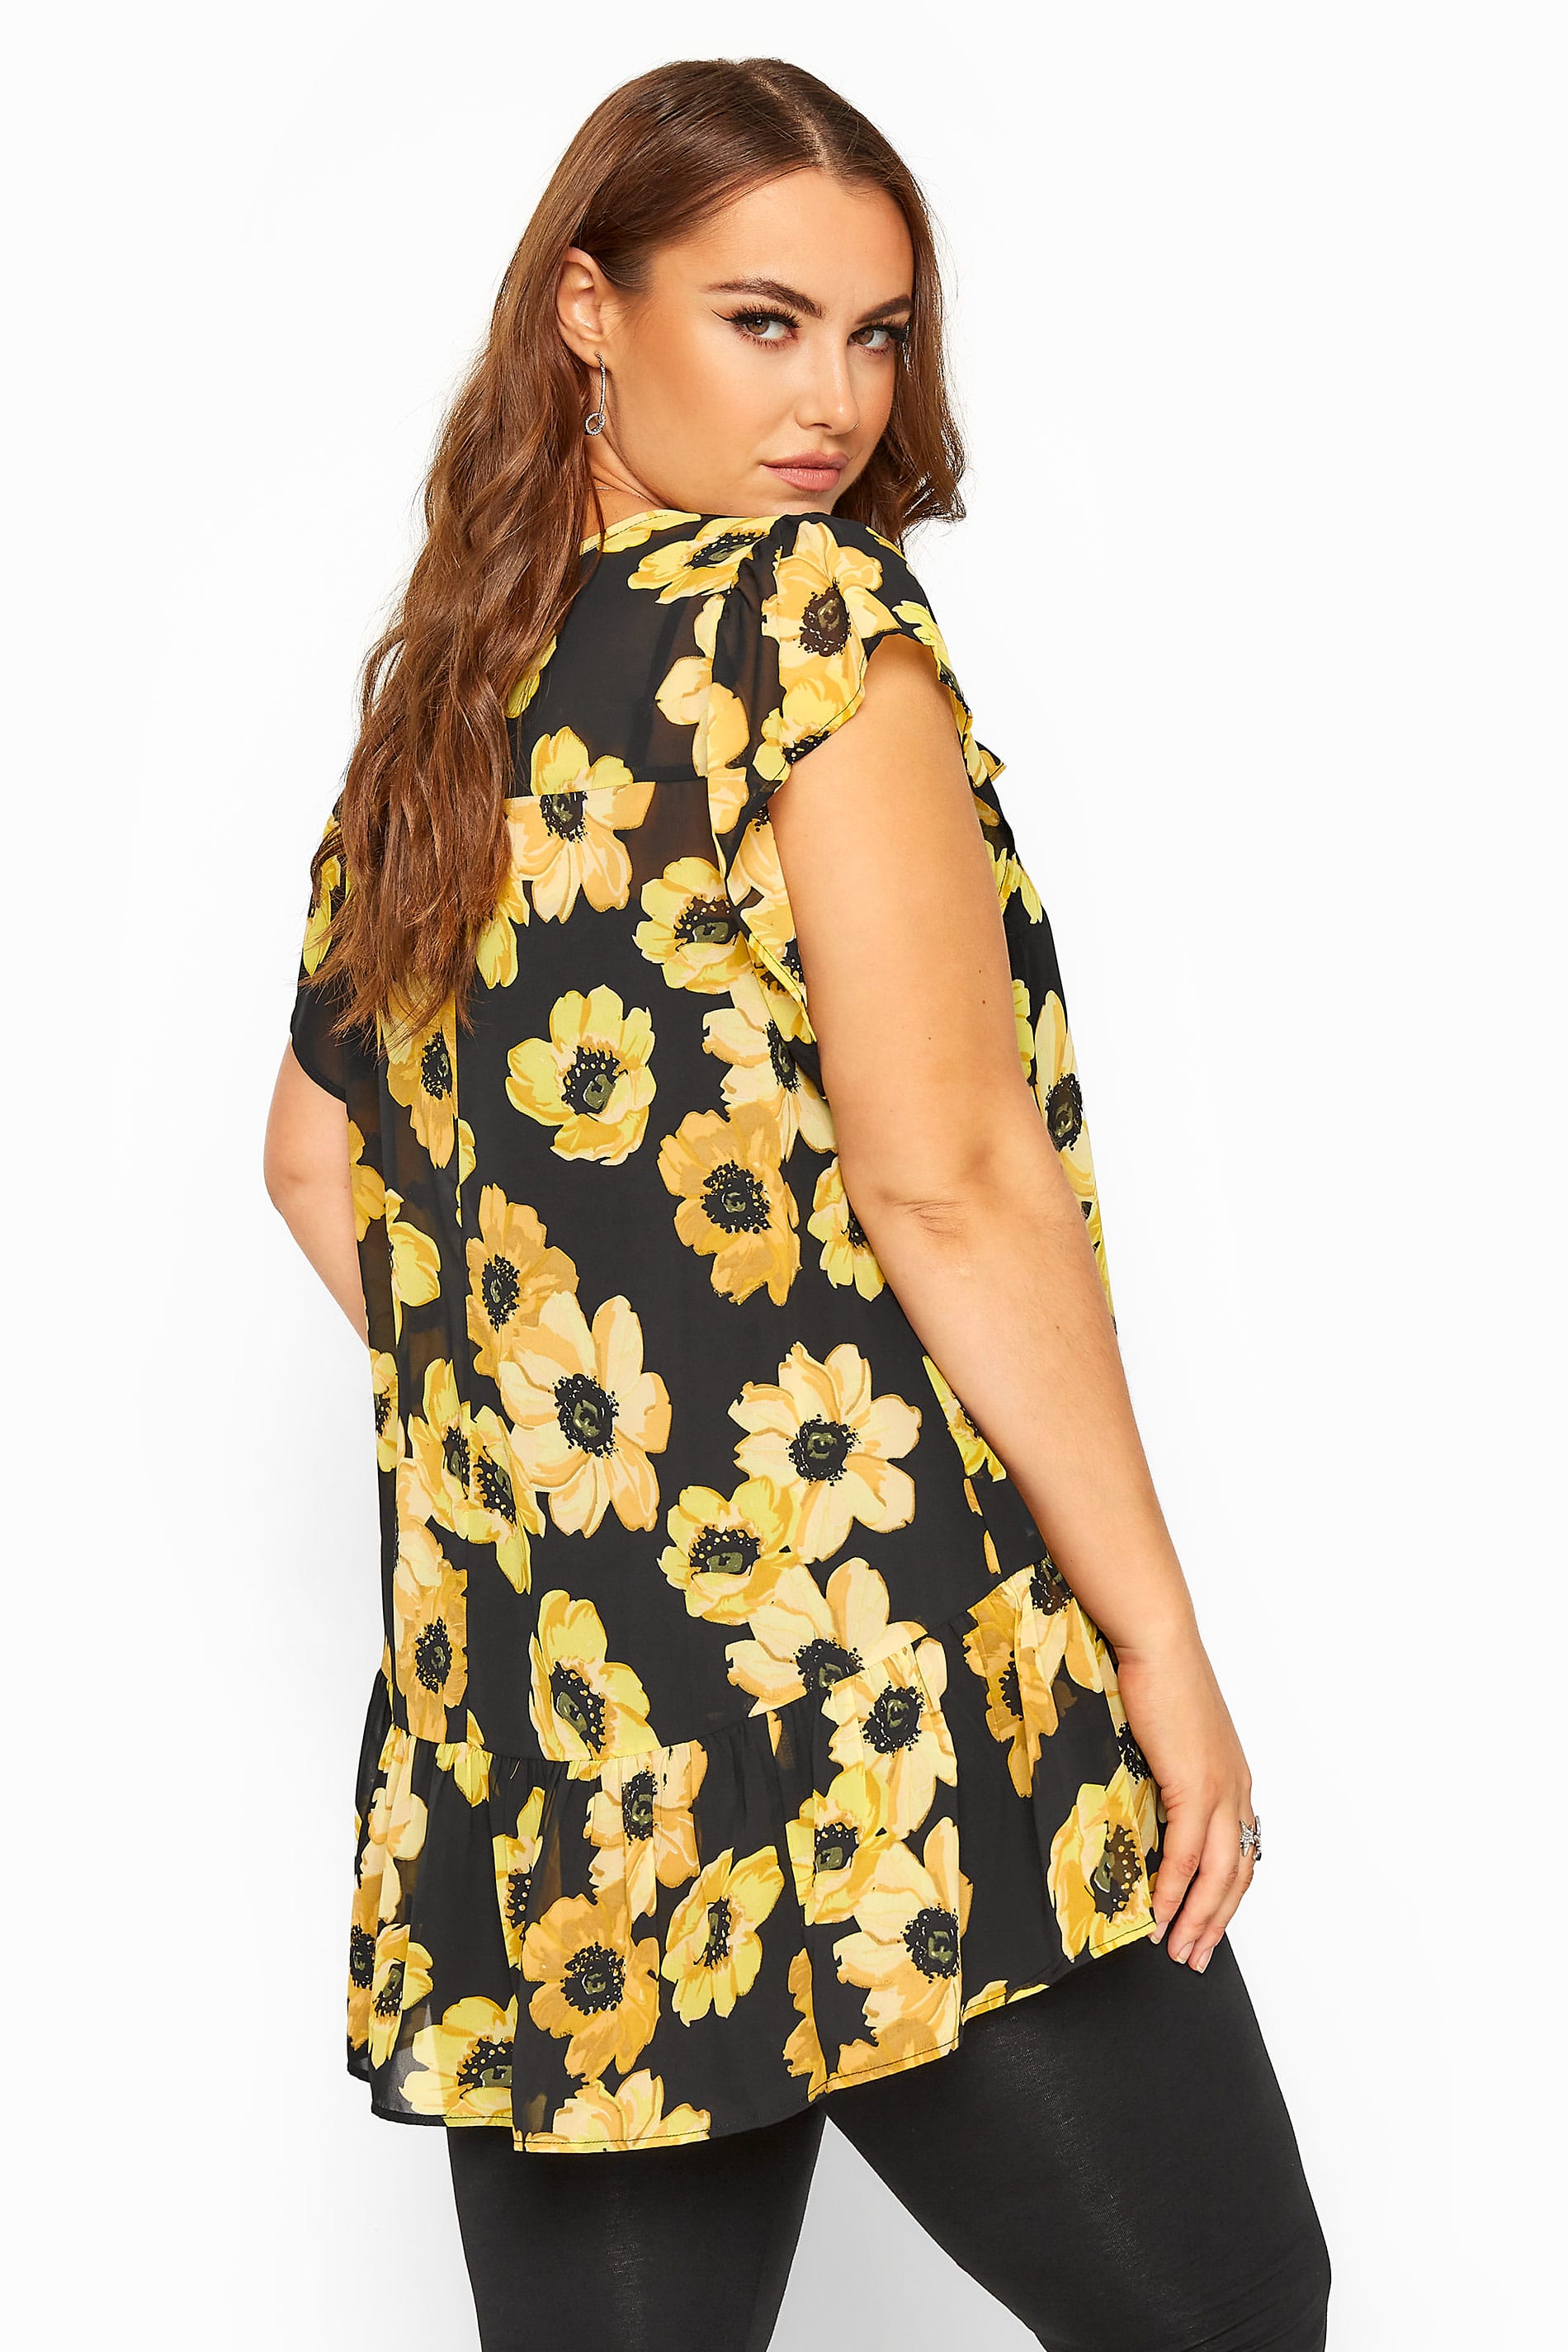 Black & Yellow Floral Frill Chiffon Blouse | Yours Clothing